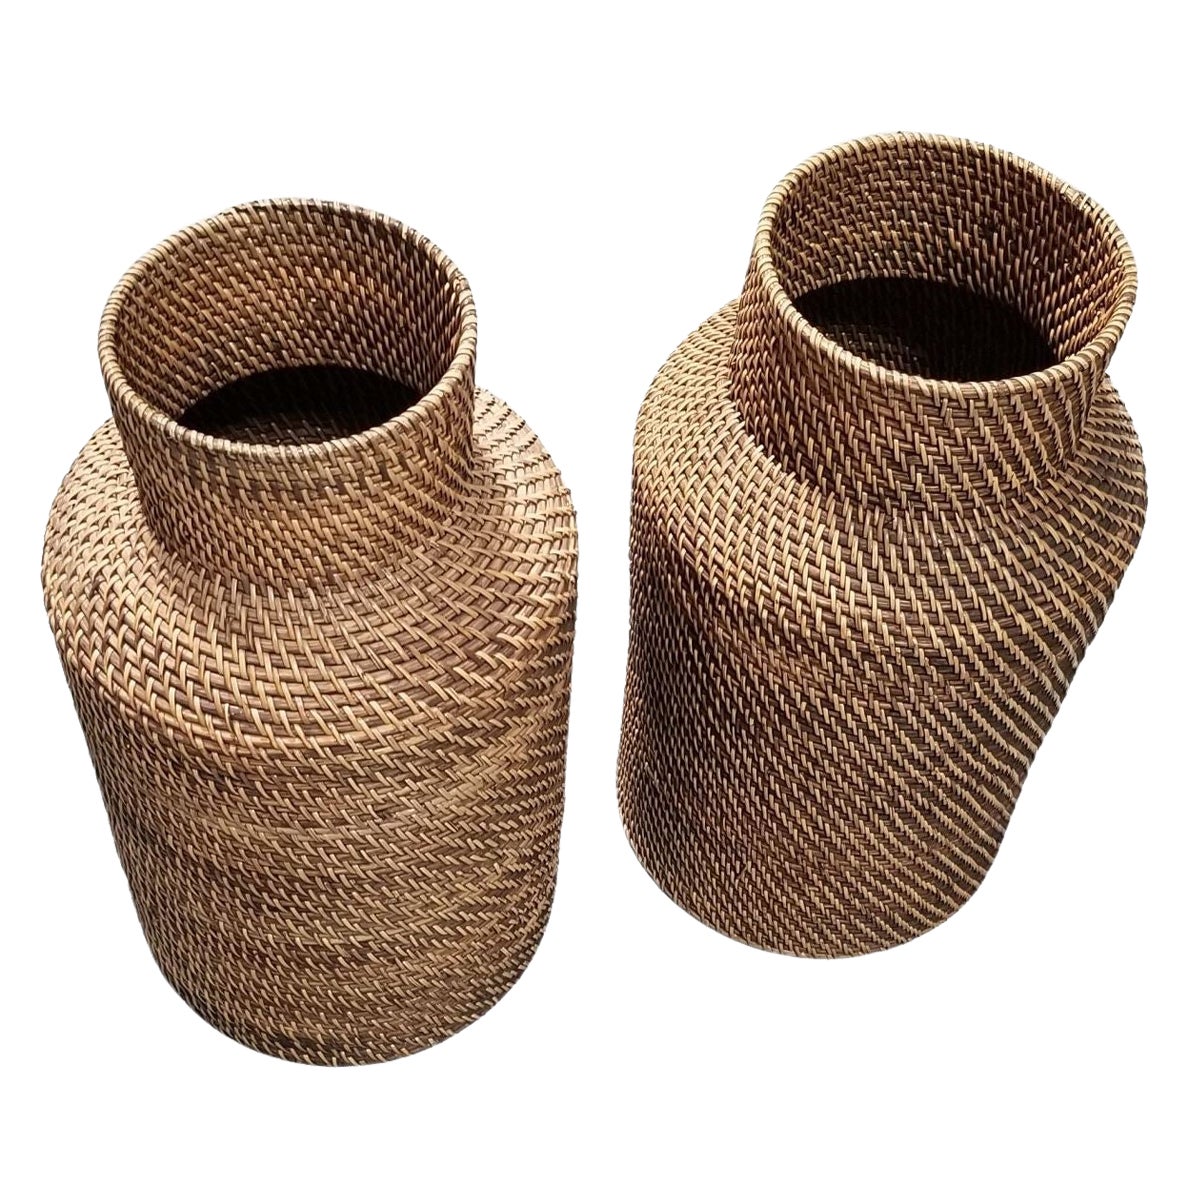 Restored Reed Rattan Wicker Decorative Vases Gabriella Crespi Styled - Pair of 2